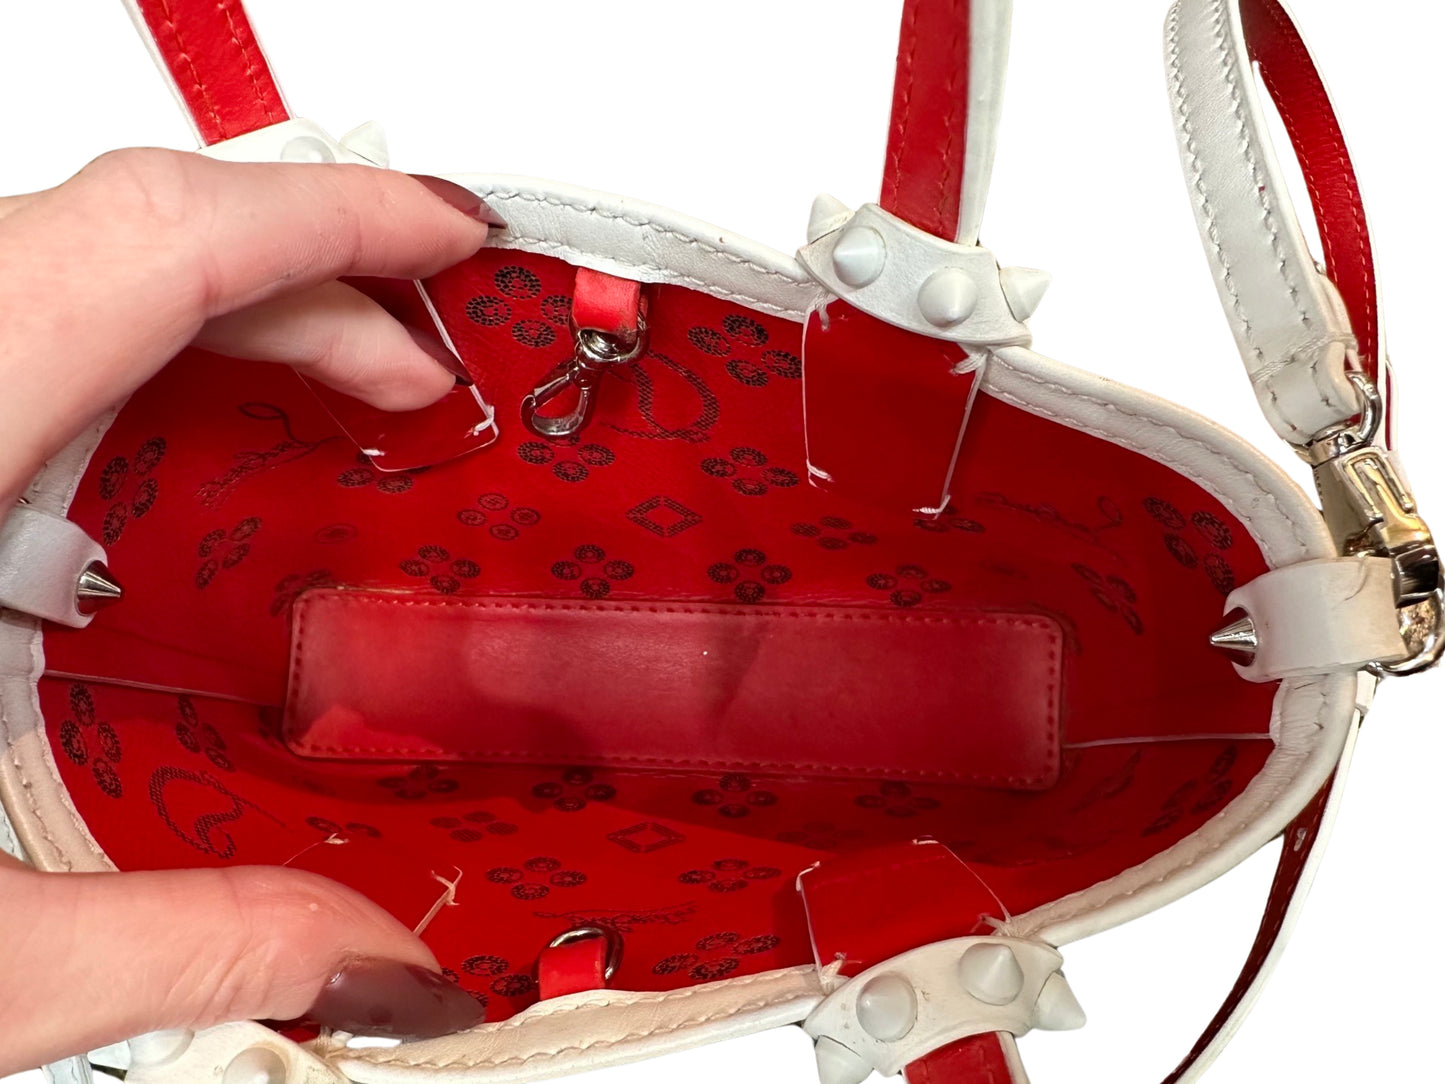 Interior of bag with red interior + black CL + Louboutin signature